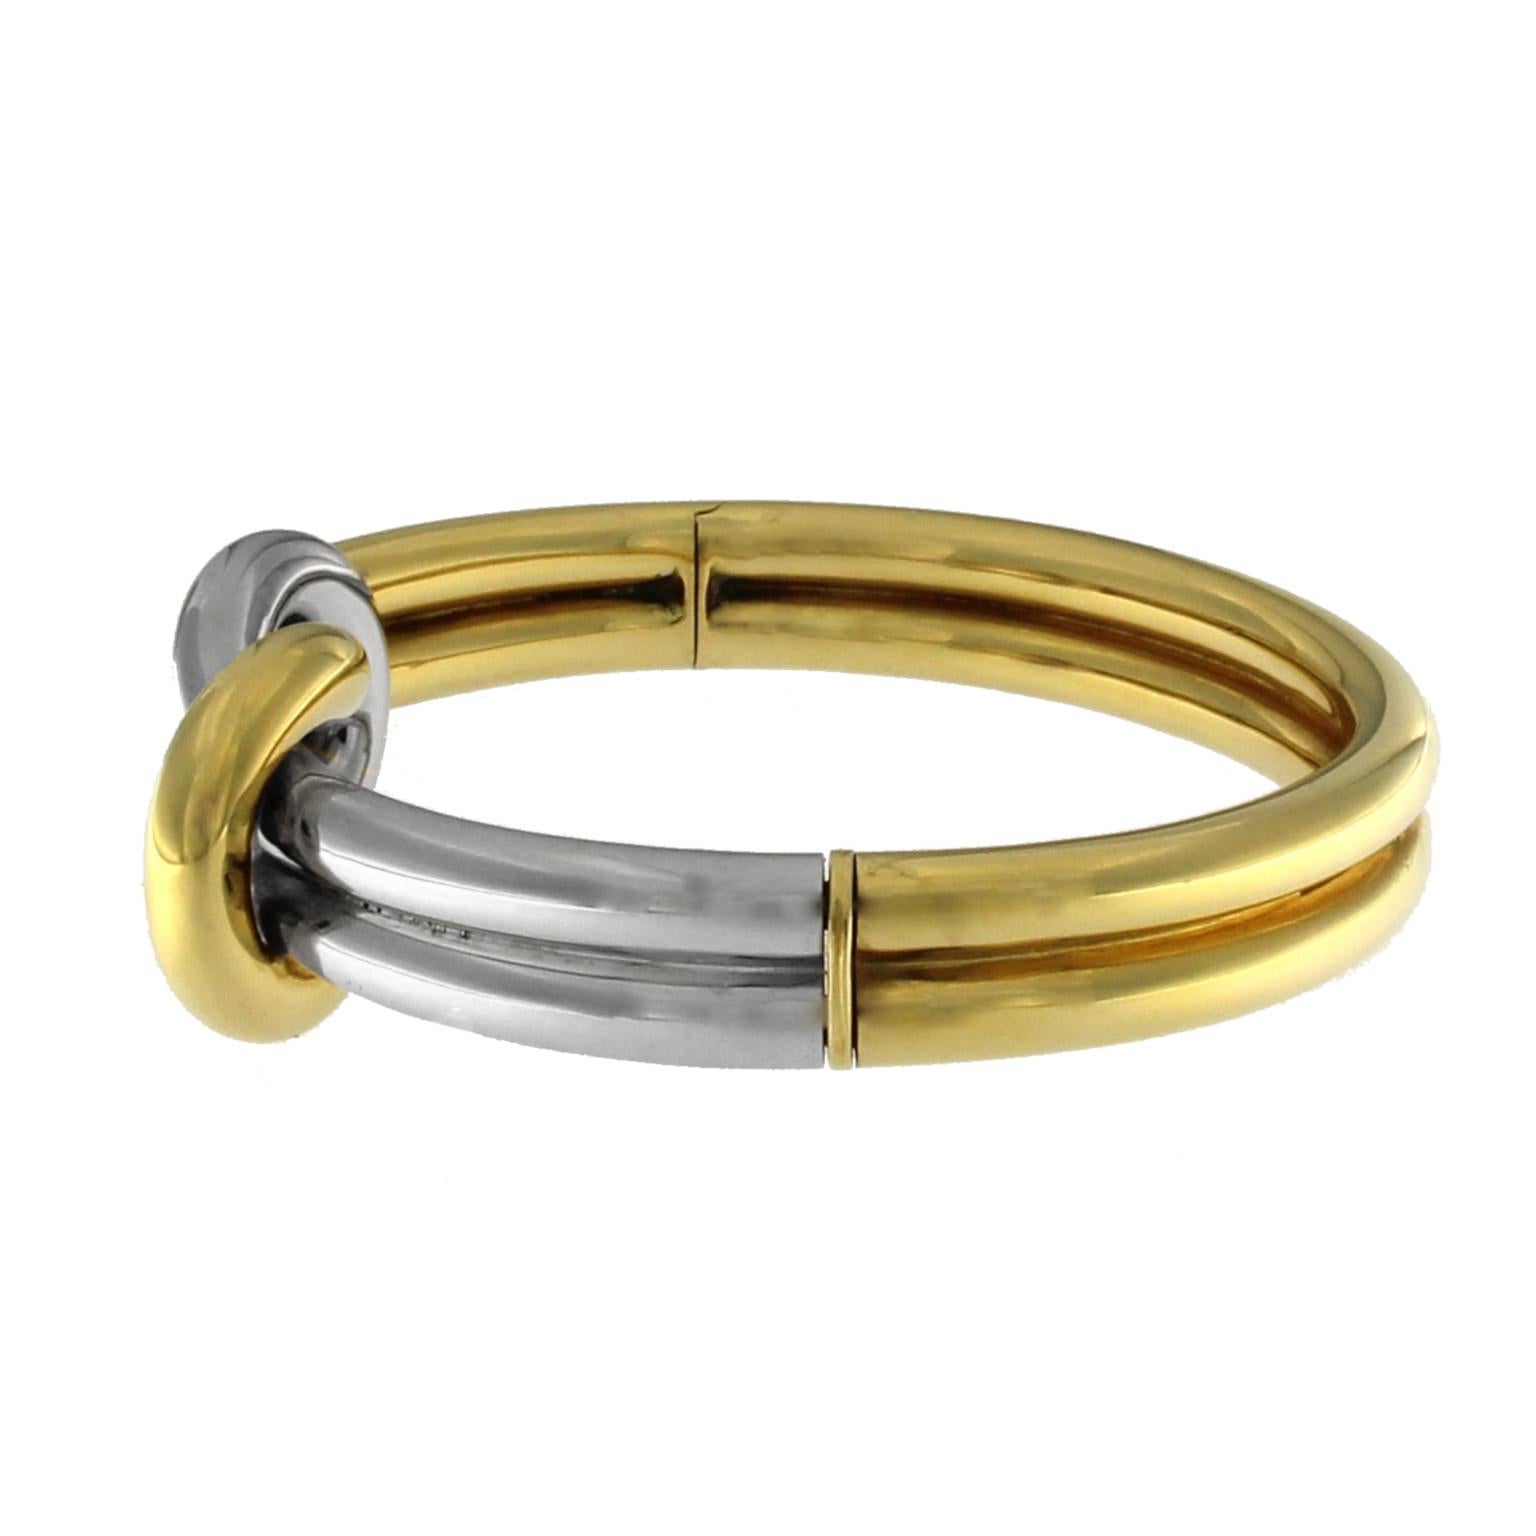 Double knot bangle in yellow gold and white gold
Extremely elegant this sailor style set
diamenter of the  bracelet 6x5 cm
The total weight of the gold is GR 46.70 
Necklace is available
Stamp 10 MI 750

